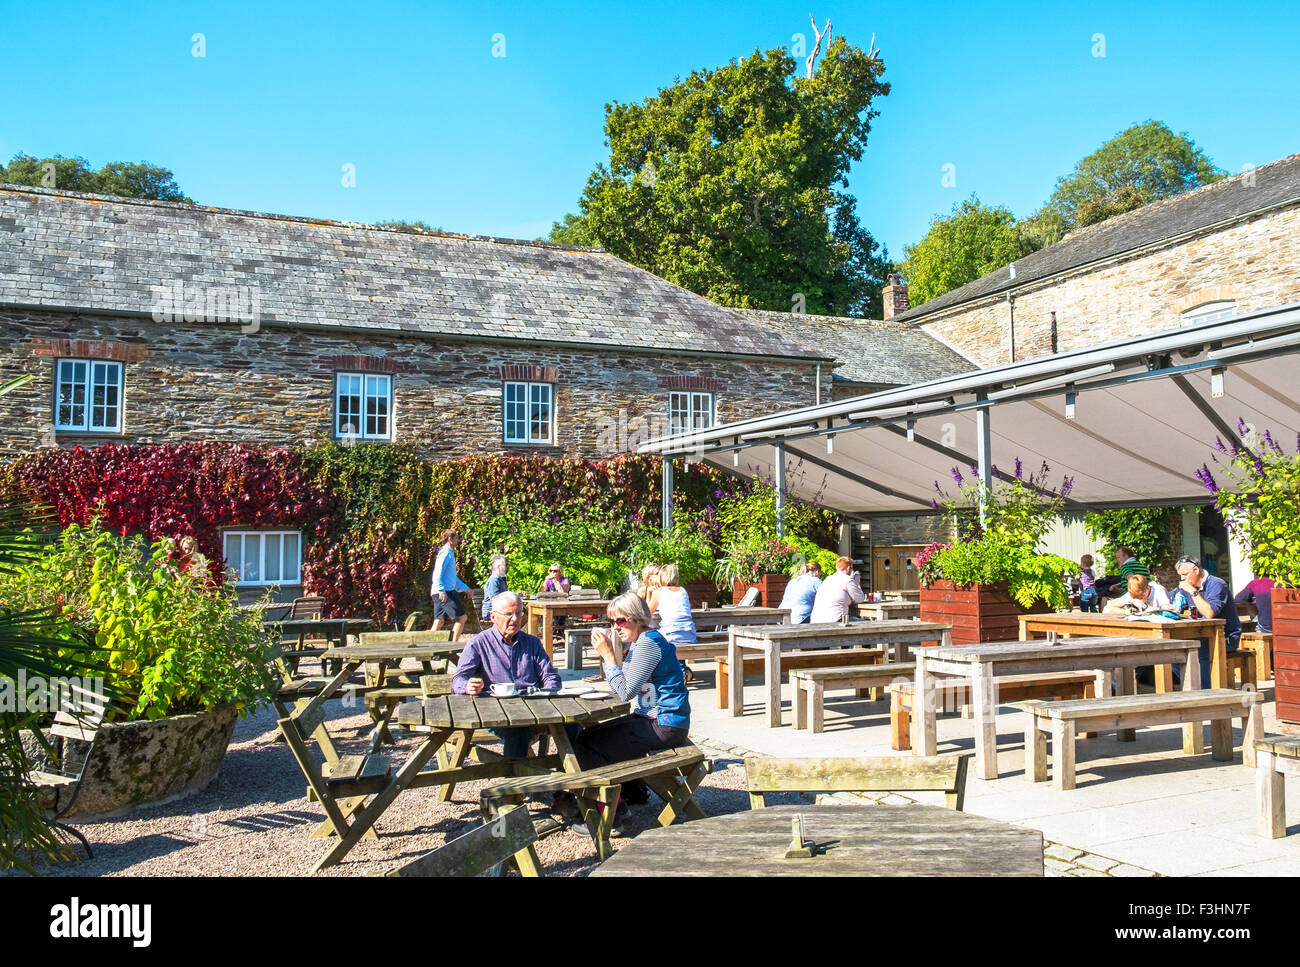 cafe at trelissick near truro in cornwall, uk Stock Photo